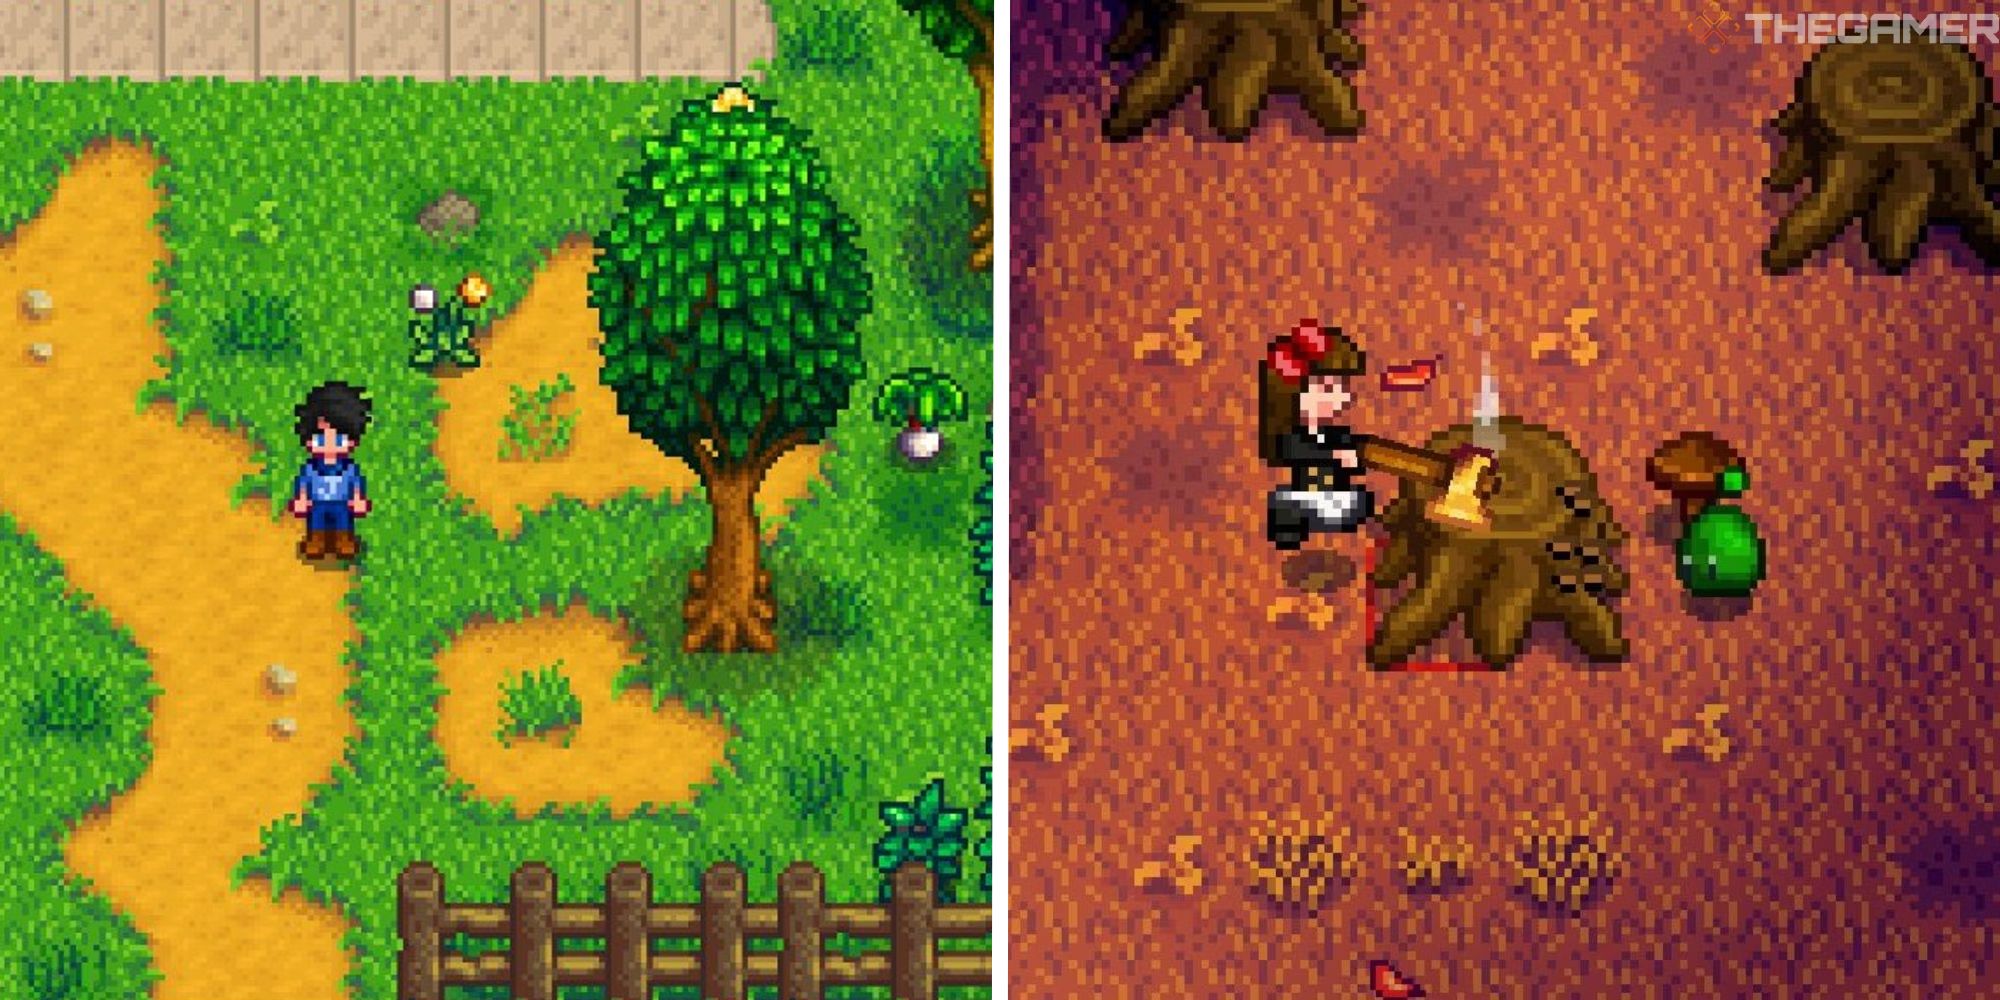 image of player near bus stop with dandelions next to image of player chopping down a stump with a slime